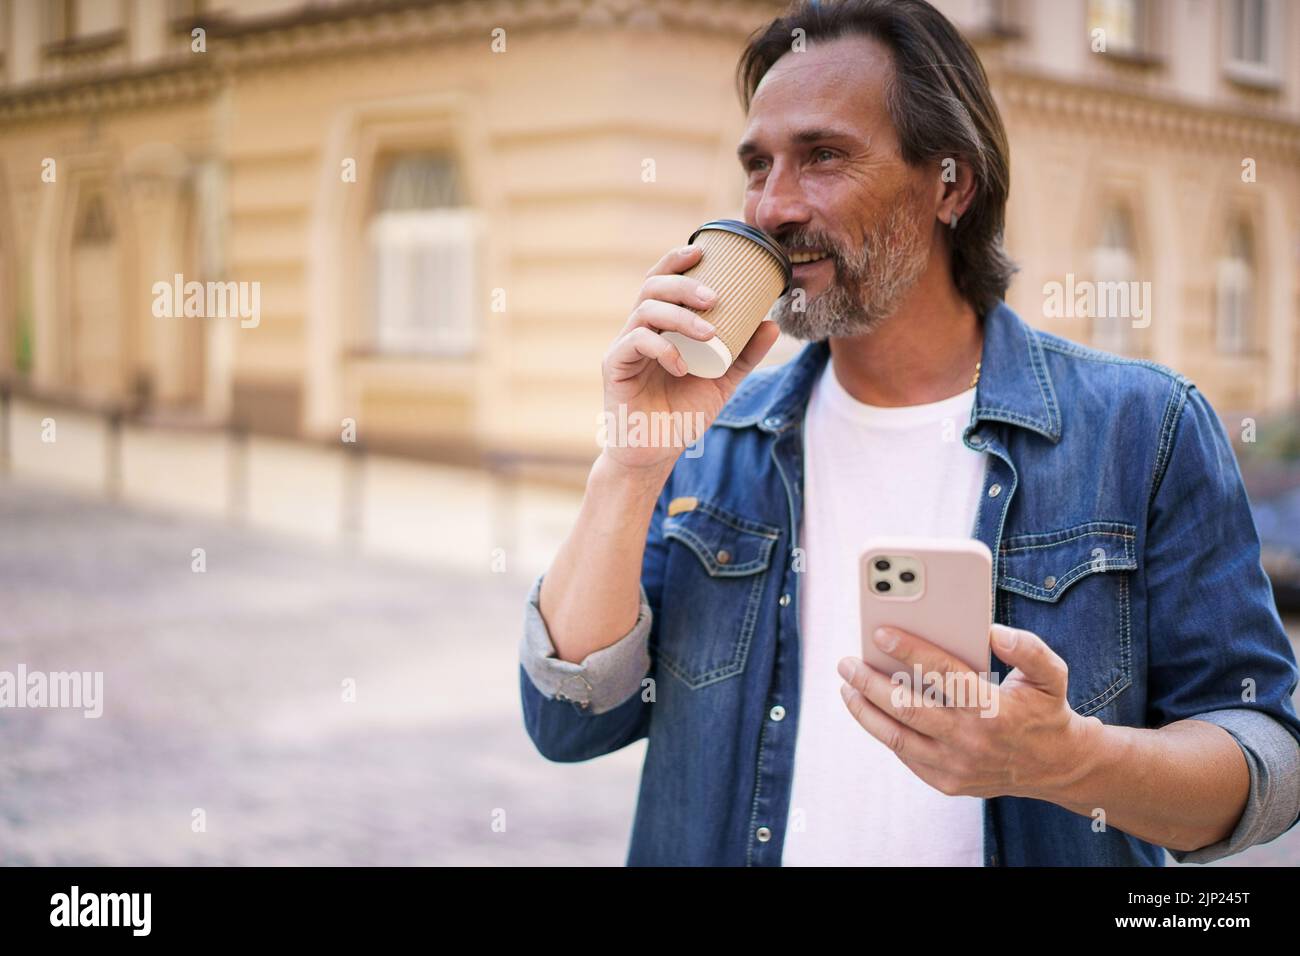 Mature man with coffee and smartphone outdoors. Middle aged man read having video call holding phone and take away paper cup with coffee wearing denim shirt. Business on the go concept.  Stock Photo